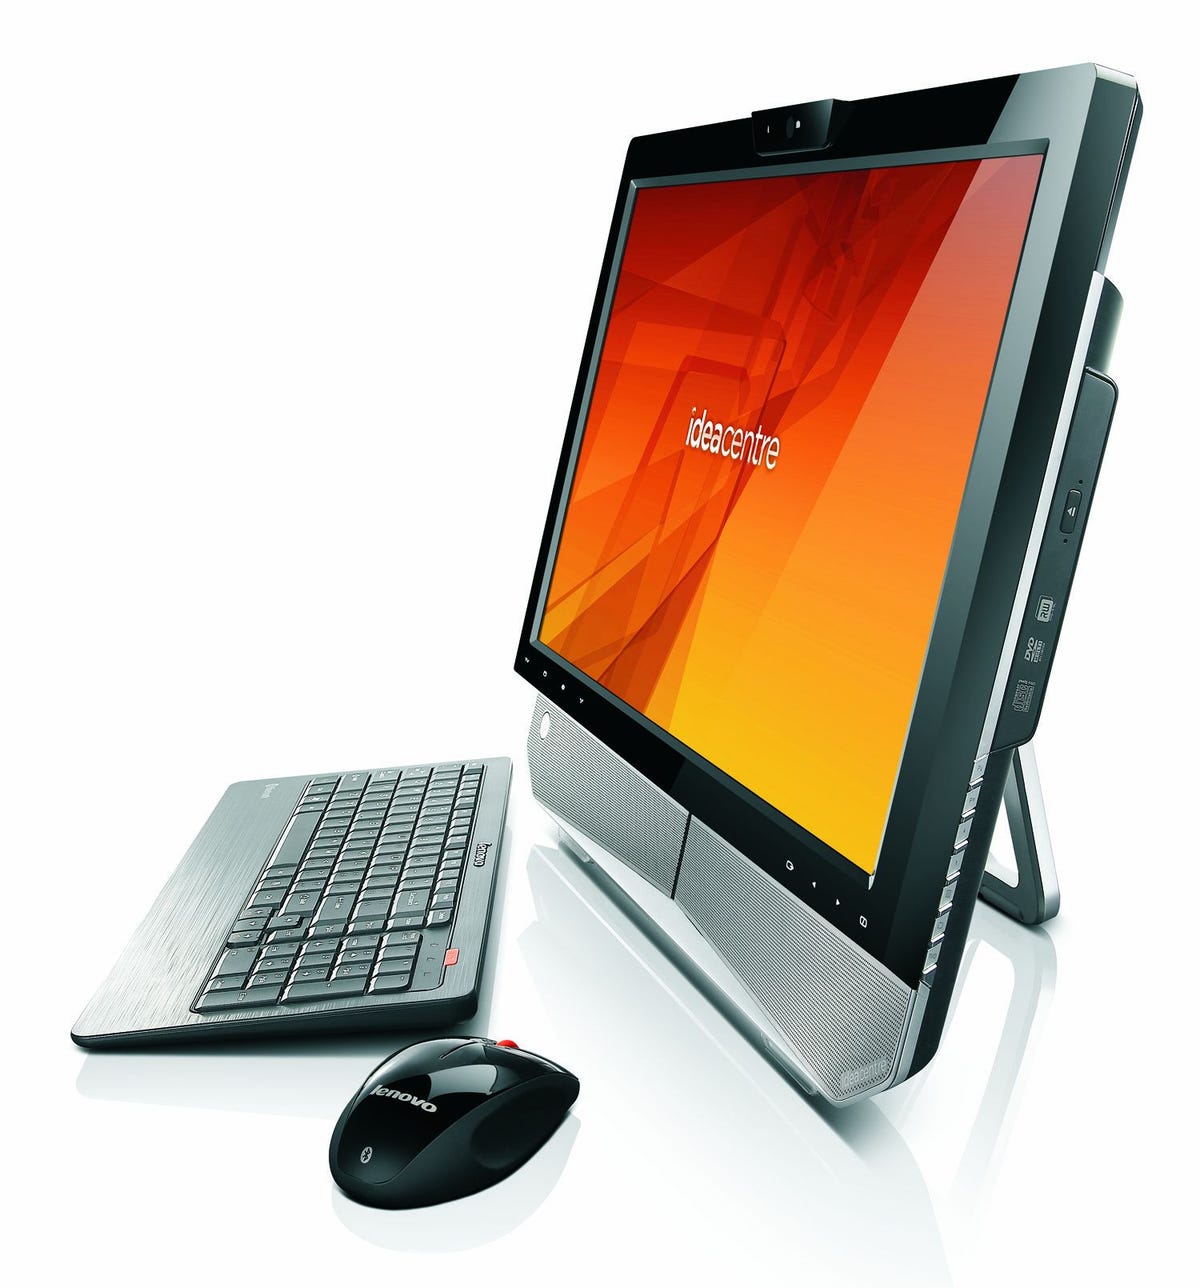 Lenovo's 21.5-inch IdeaCentre B320 comes with some unique TV-watching features.